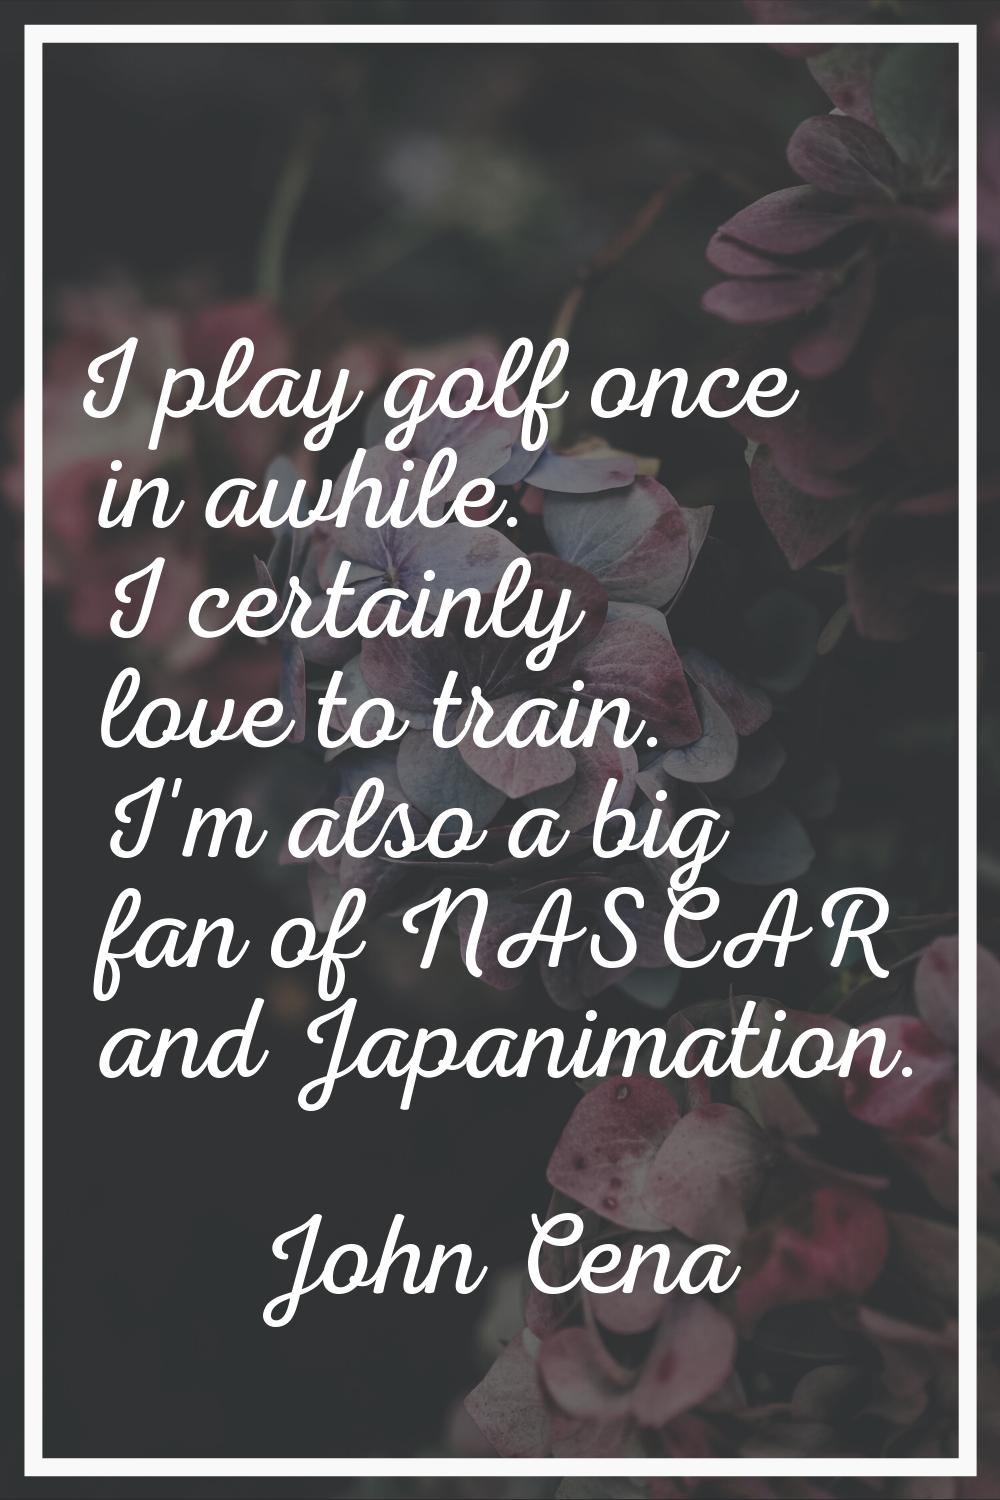 I play golf once in awhile. I certainly love to train. I'm also a big fan of NASCAR and Japanimatio